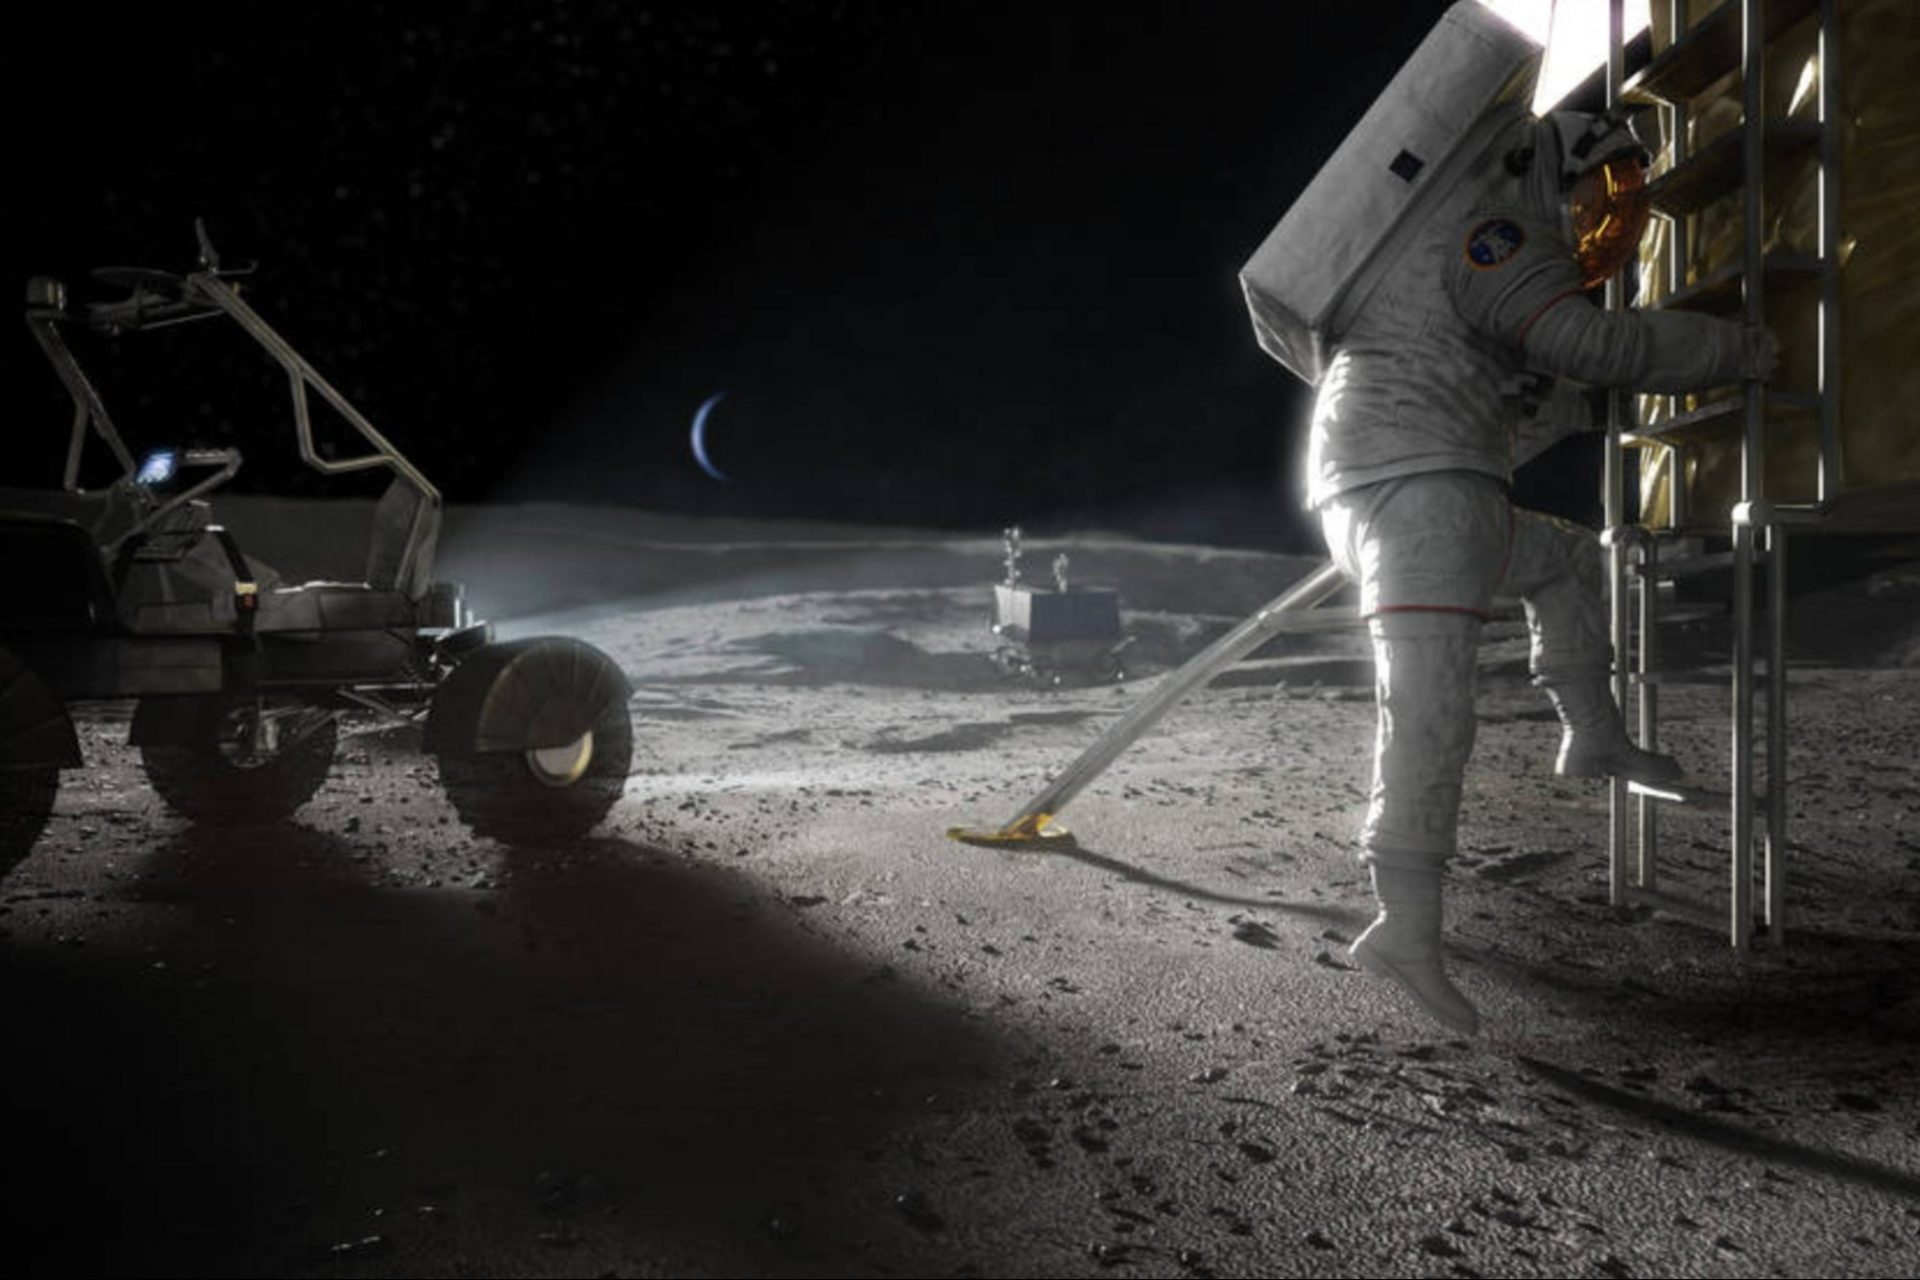 NASA Awards SpaceX, Blue Starting place, And 3 Other Firms $ 146 Million In Contracts To Hurry To The Moon